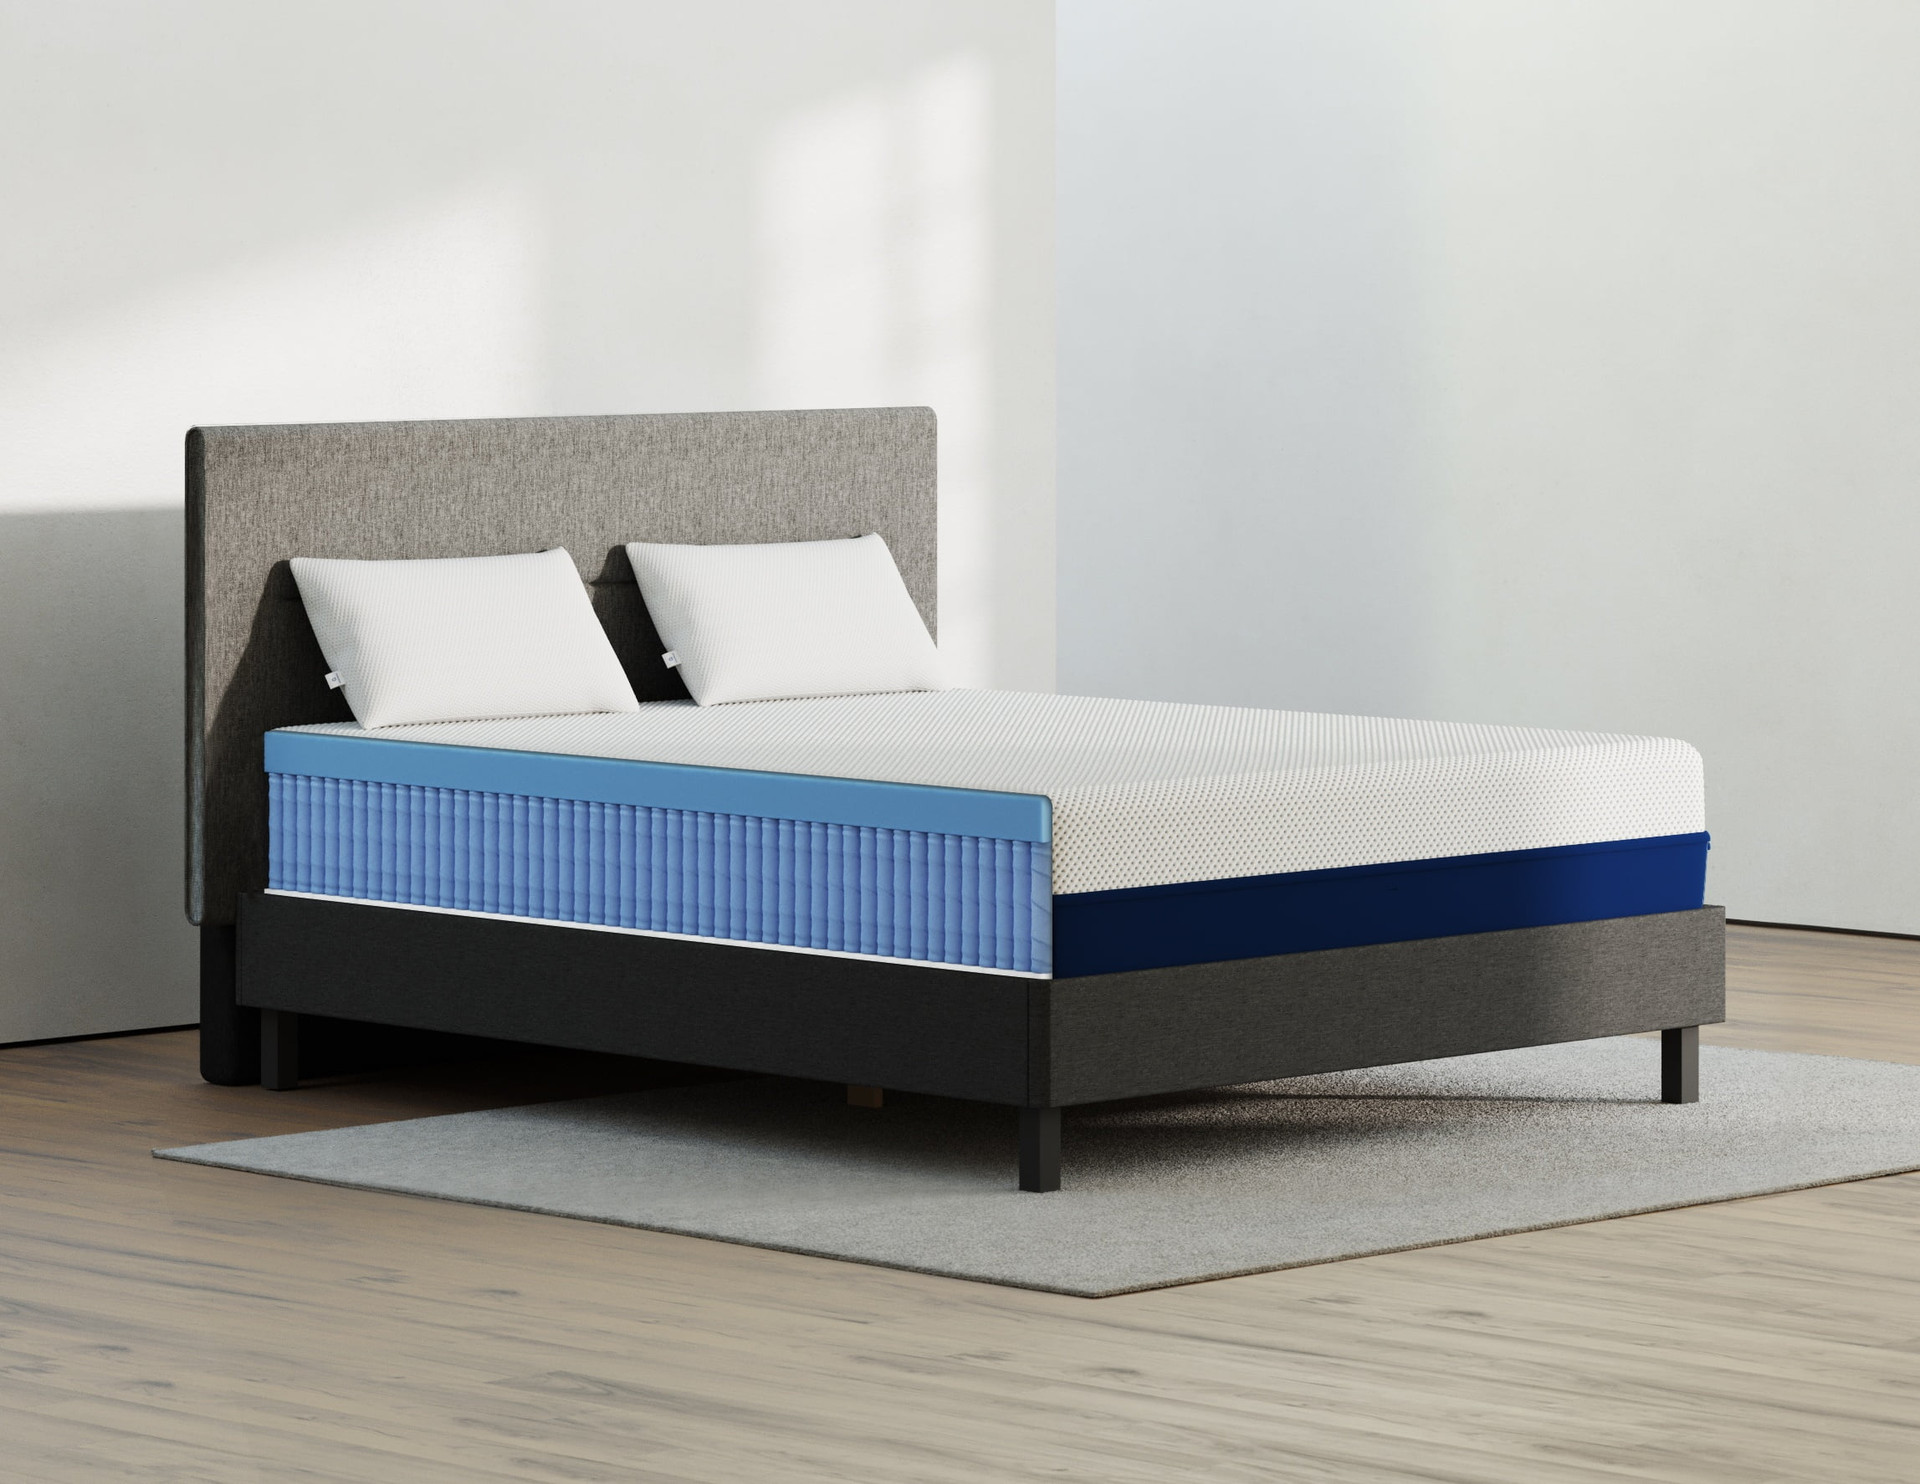 Amerisleep bed with blue layers appearing and two pillows over the bed